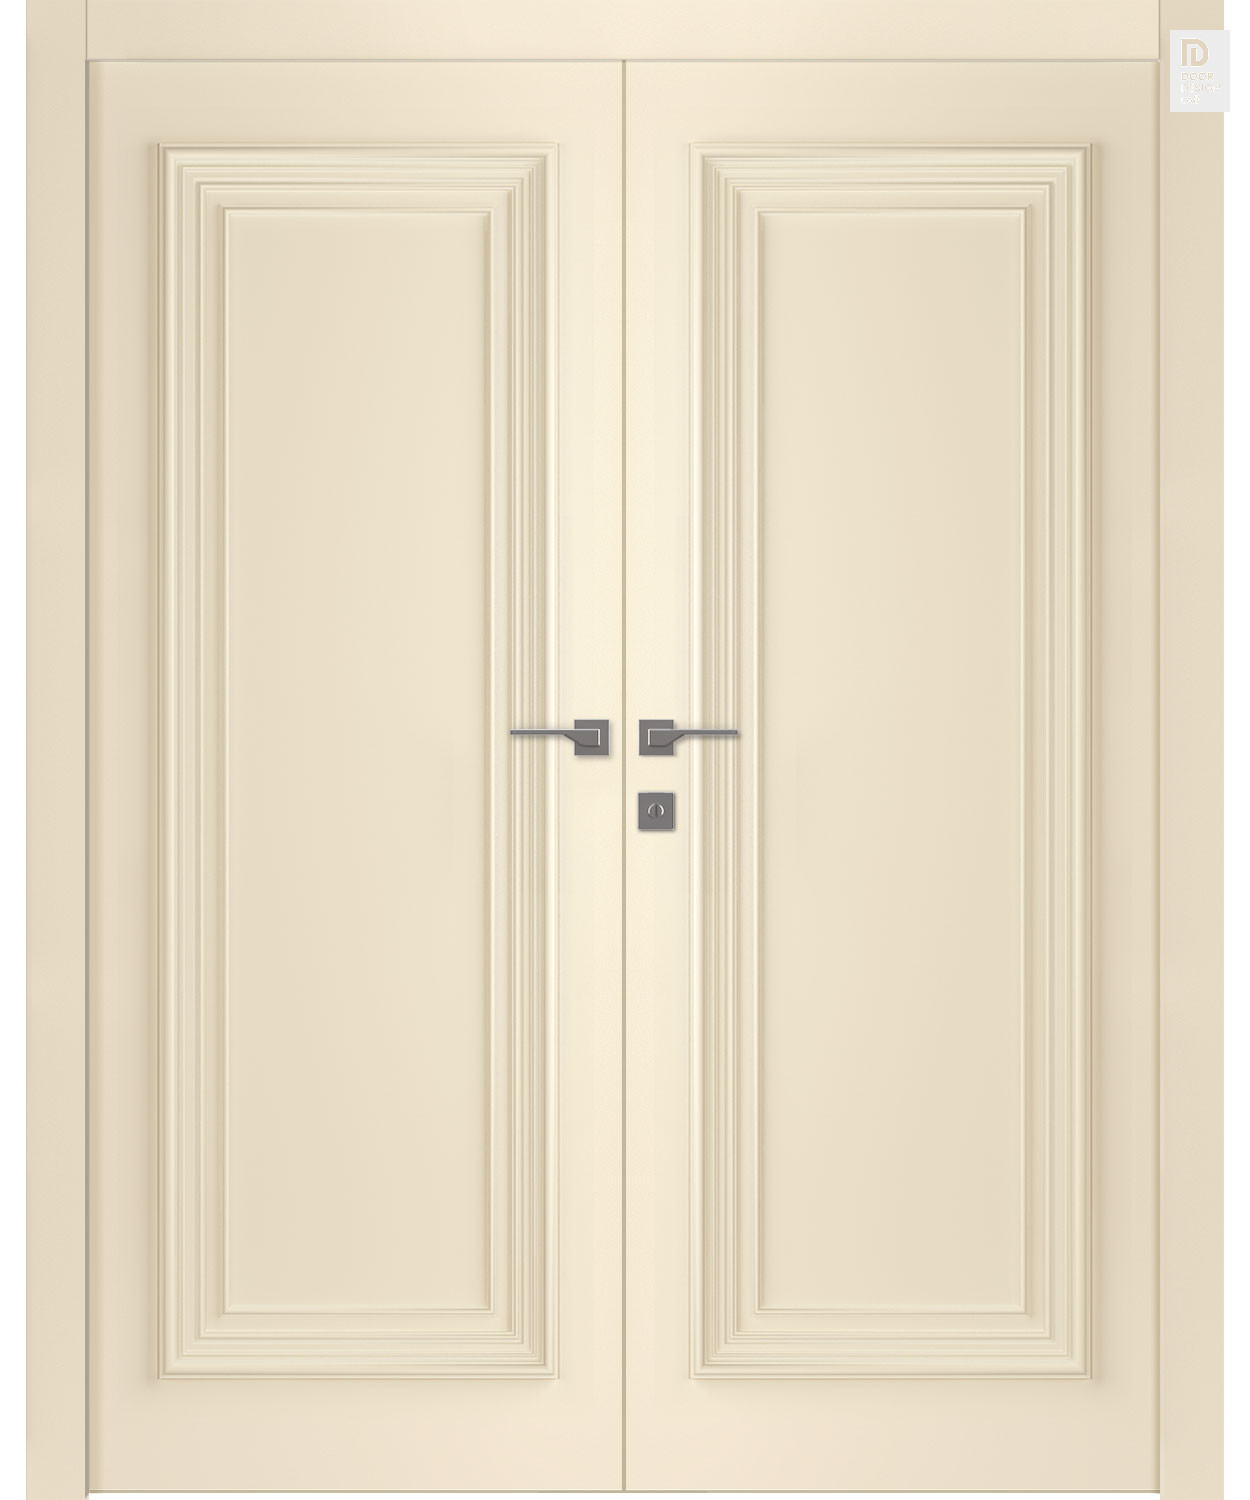 Modern interior door Palazzo 1 Ivory Double for $699.00, Solid core, No ...